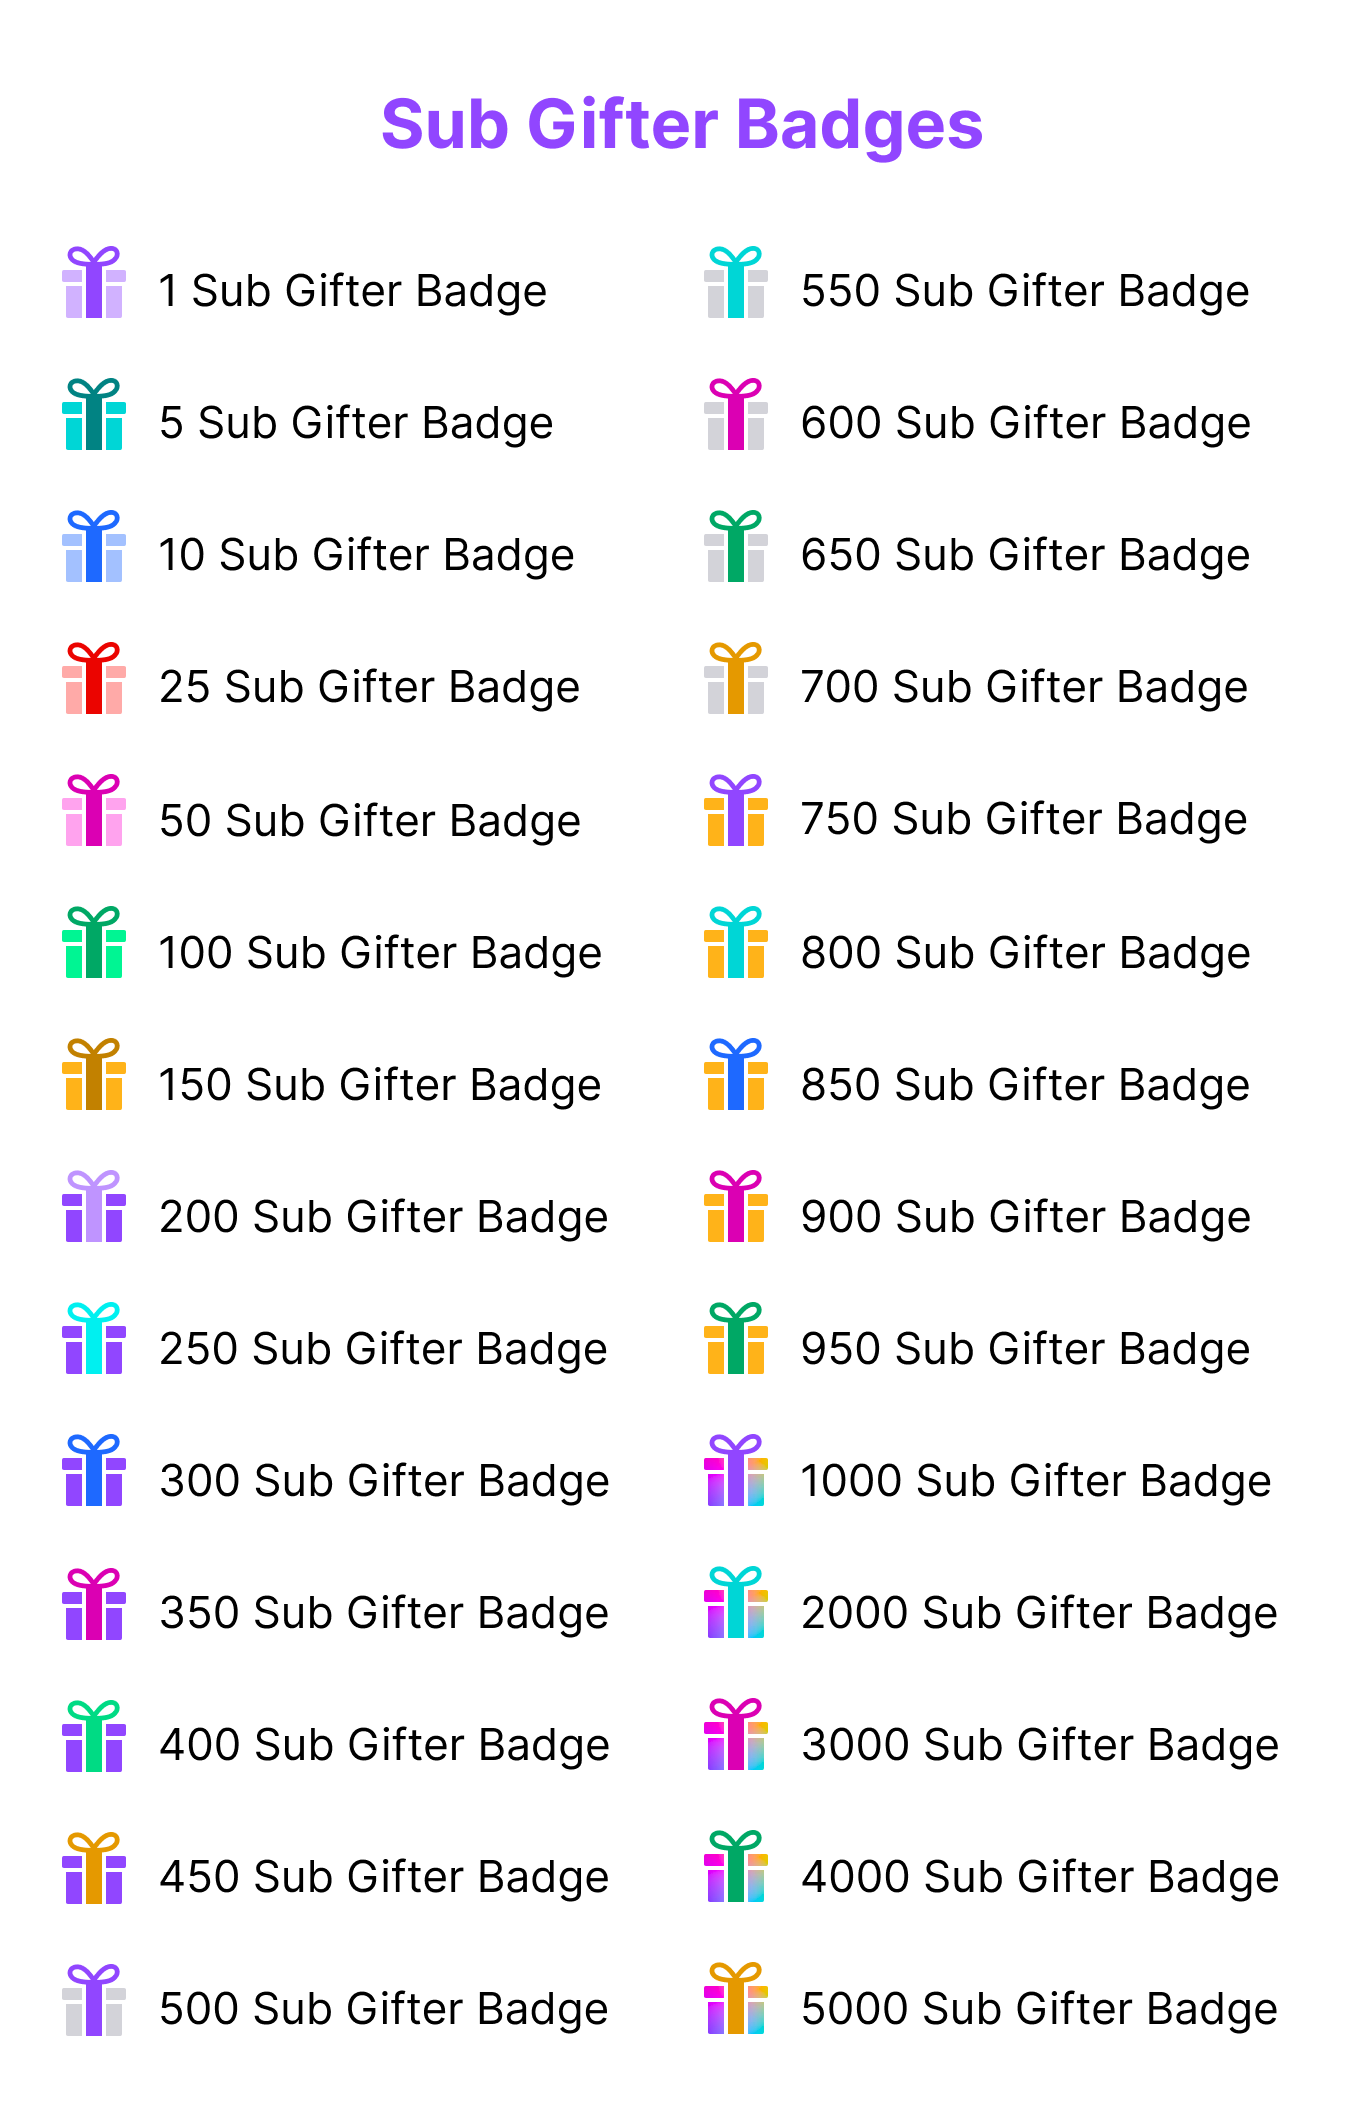 twitch sub gifter badges